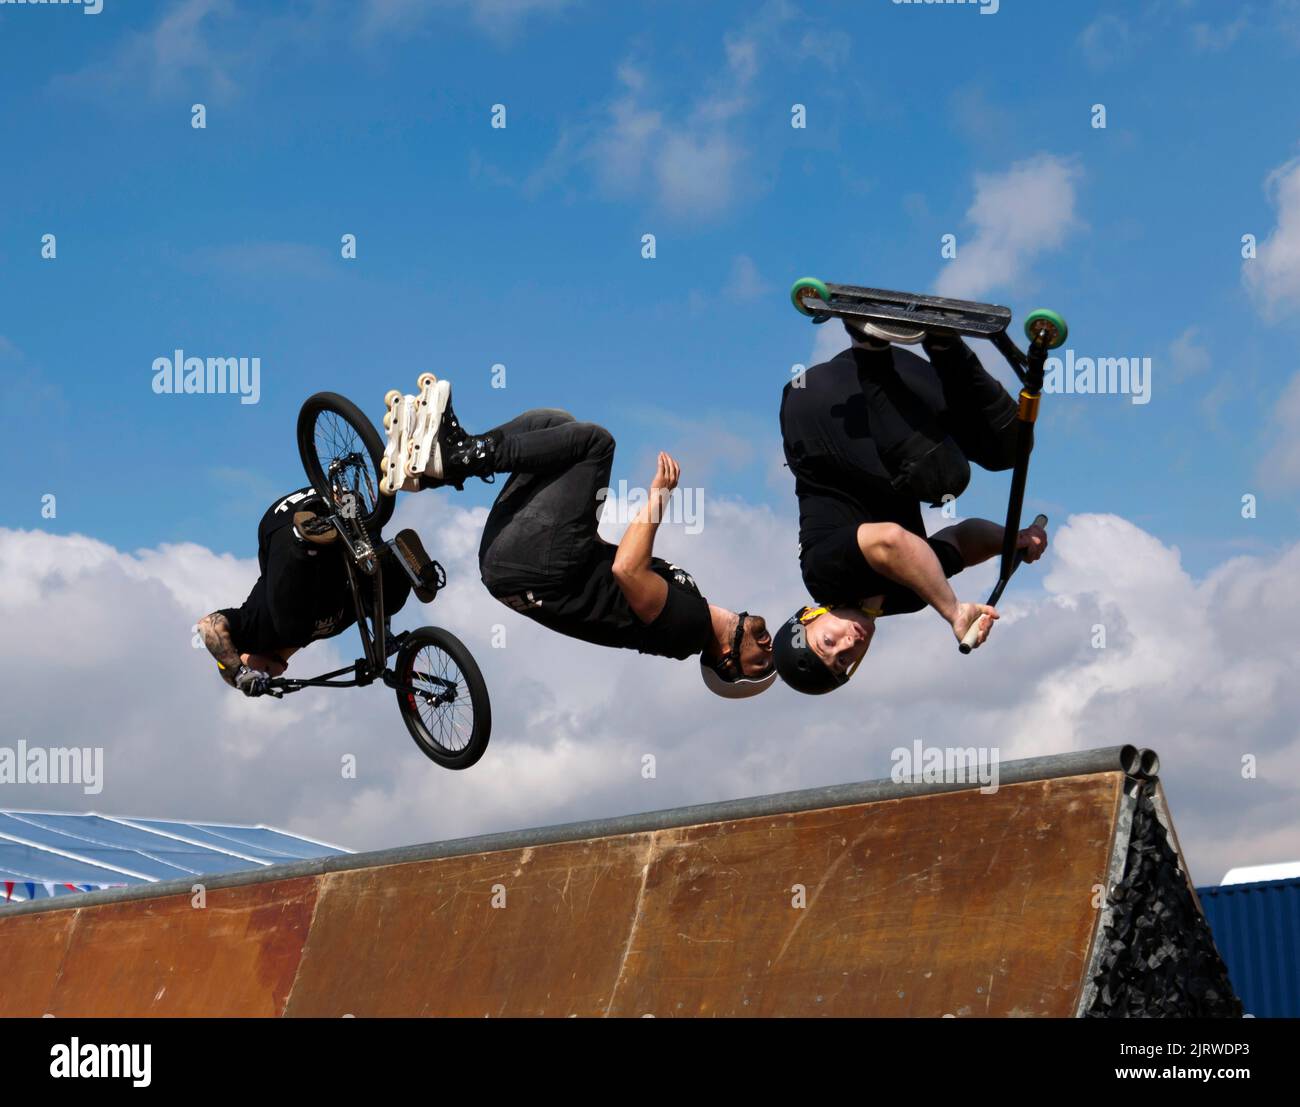 Silverstone Circuit, Silverstone, Nr, Towcester, 26th August, 2022. Extreme Sports demonstration by BMX Legends Credit: John Gaffen/Alamy Live News Stock Photo